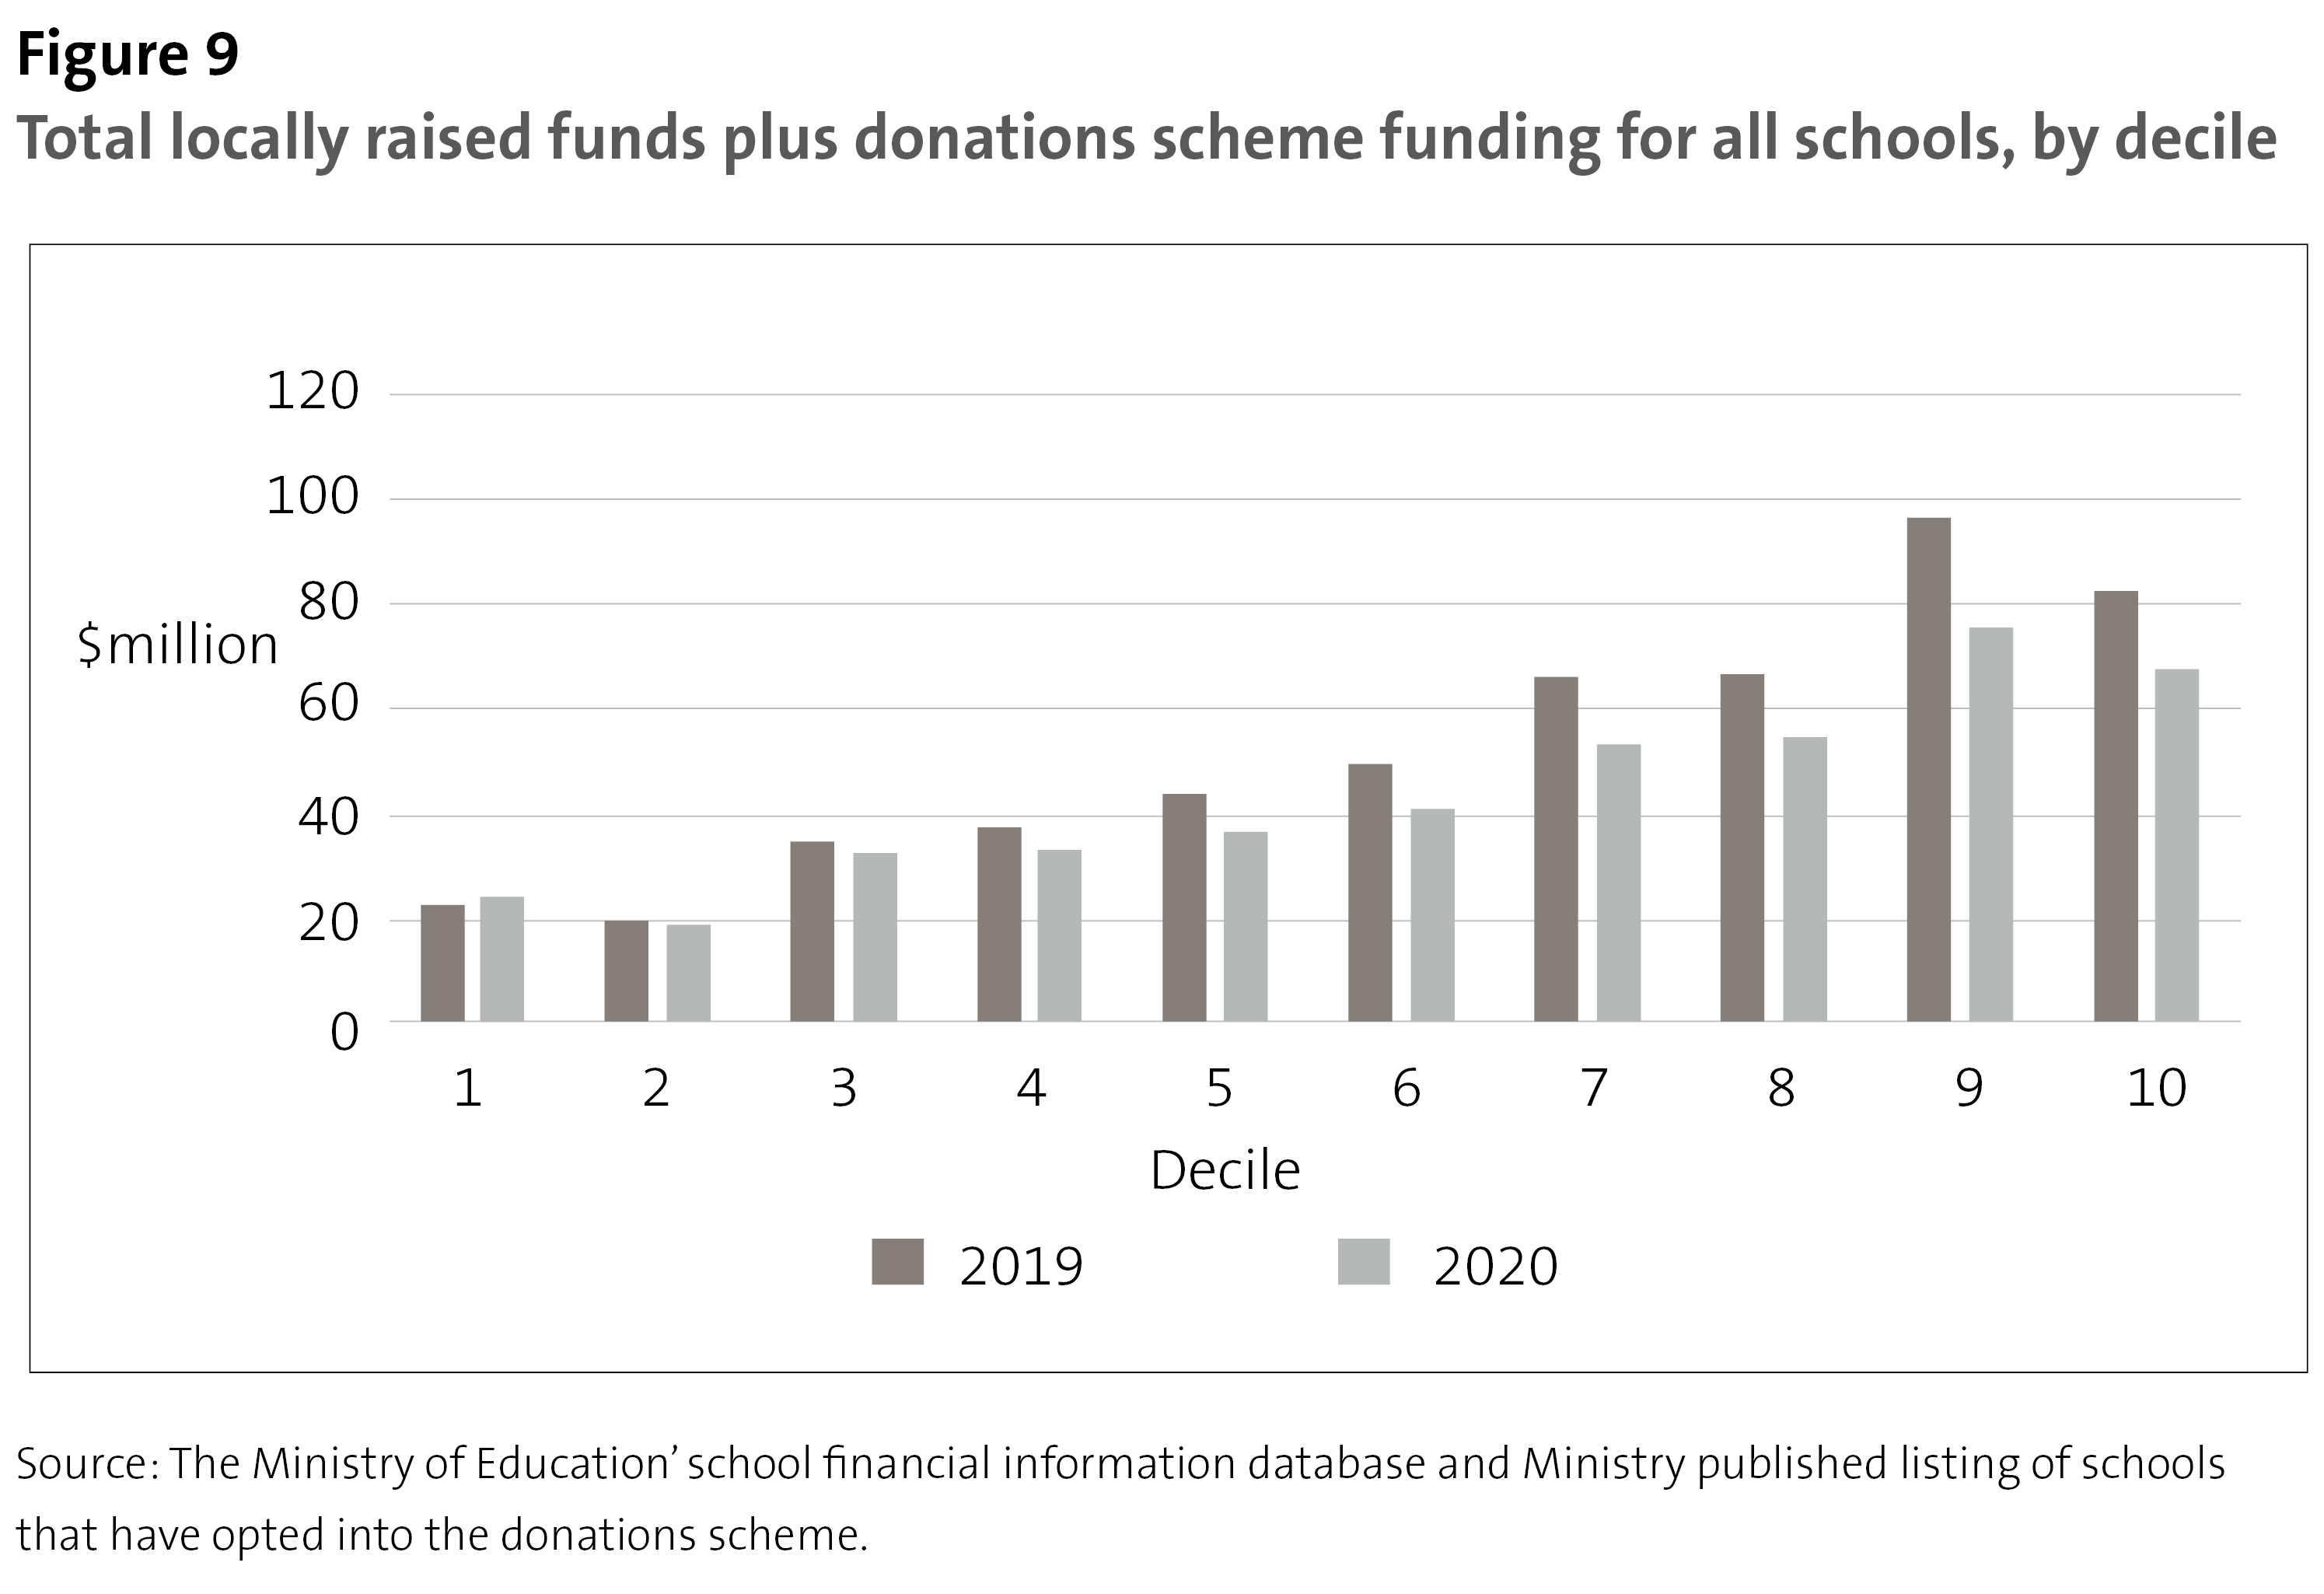 Figure 9 - Total locally raised funds plus donations scheme funding for all schools, by decile